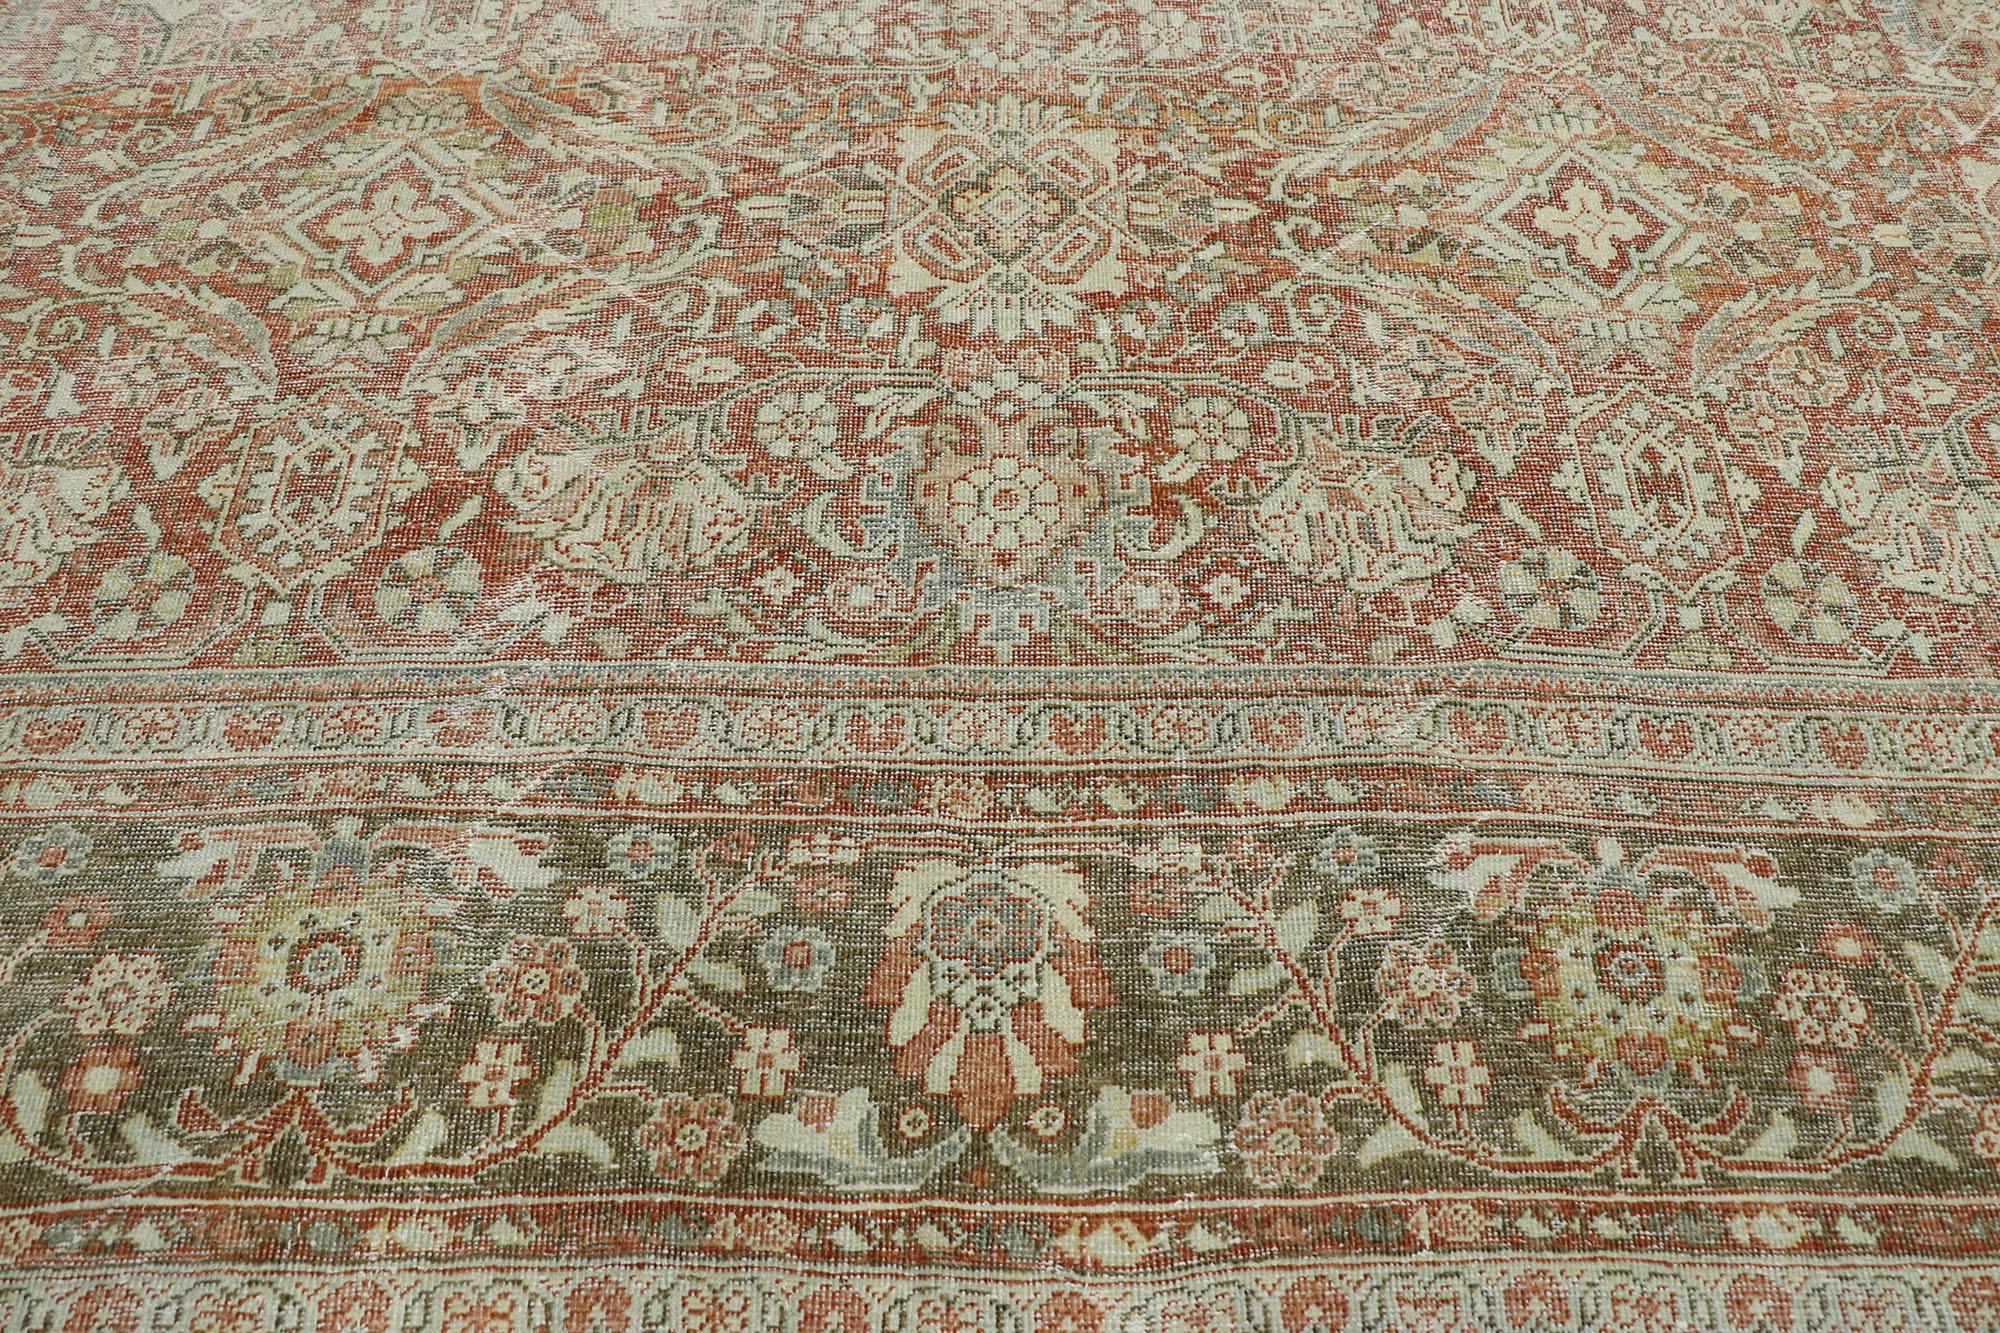 Hand-Knotted Distressed Antique Persian Mahal Rug with Rustic American Colonial Style For Sale